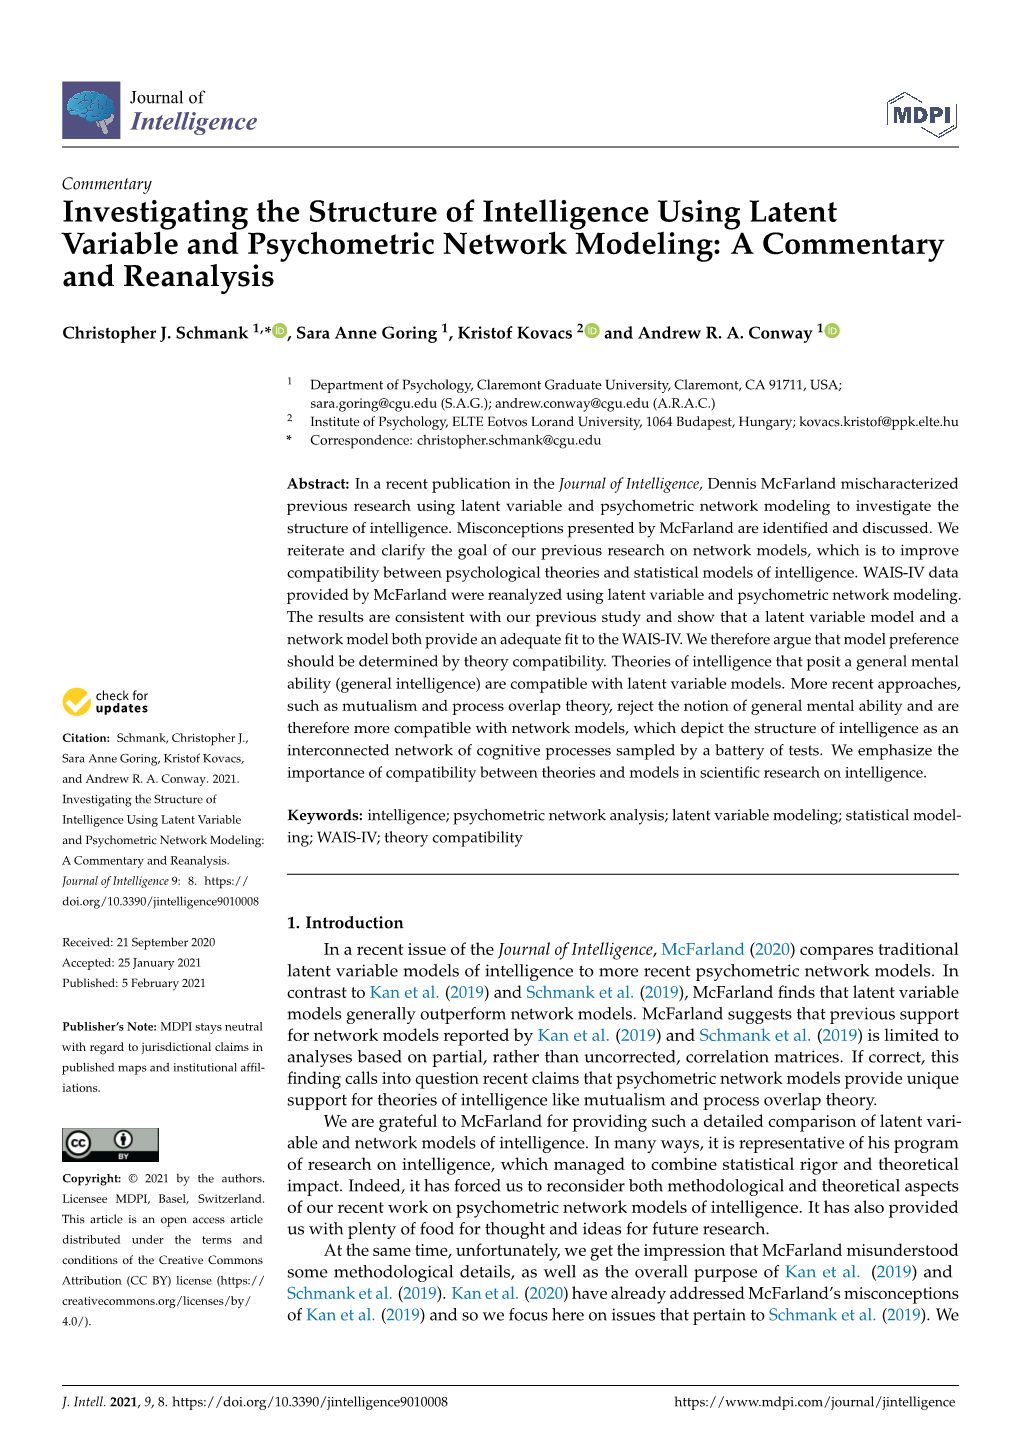 Investigating the Structure of Intelligence Using Latent Variable and Psychometric Network Modeling: a Commentary and Reanalysis